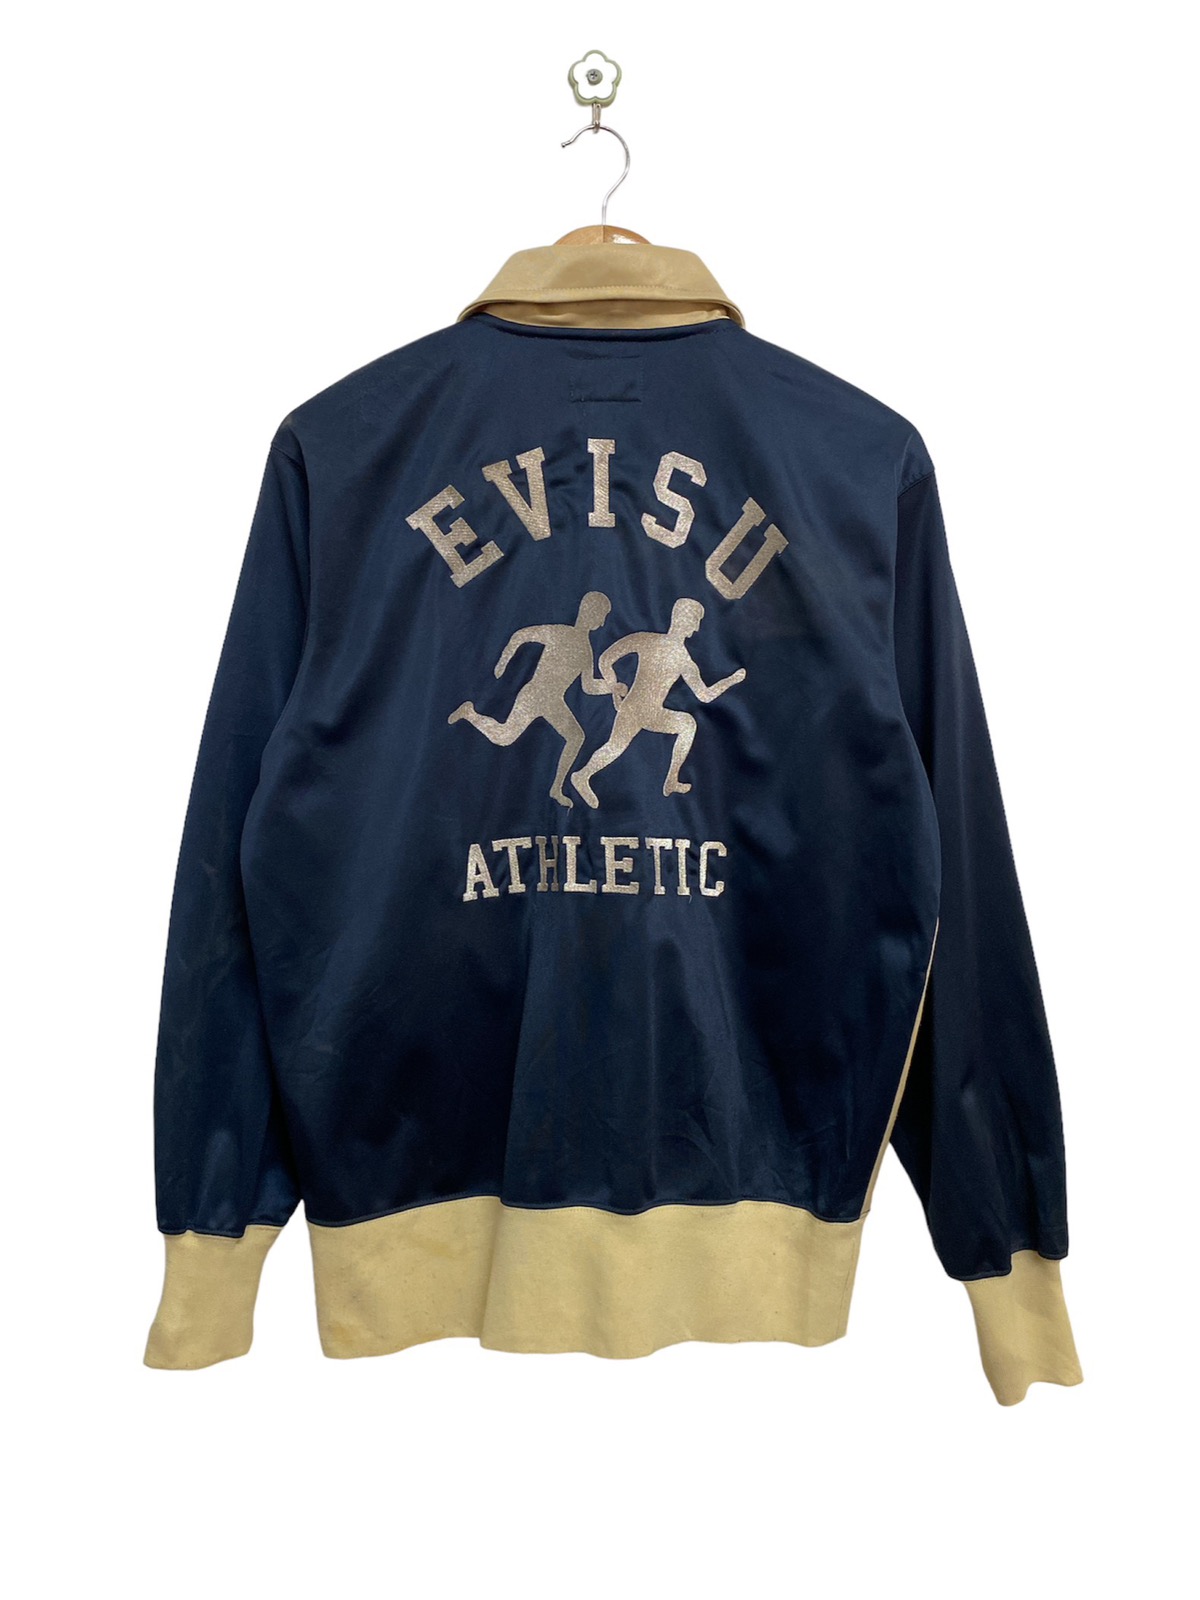 Evisu Athletic Big Spellout Embroidered Sweater Jacket - 2